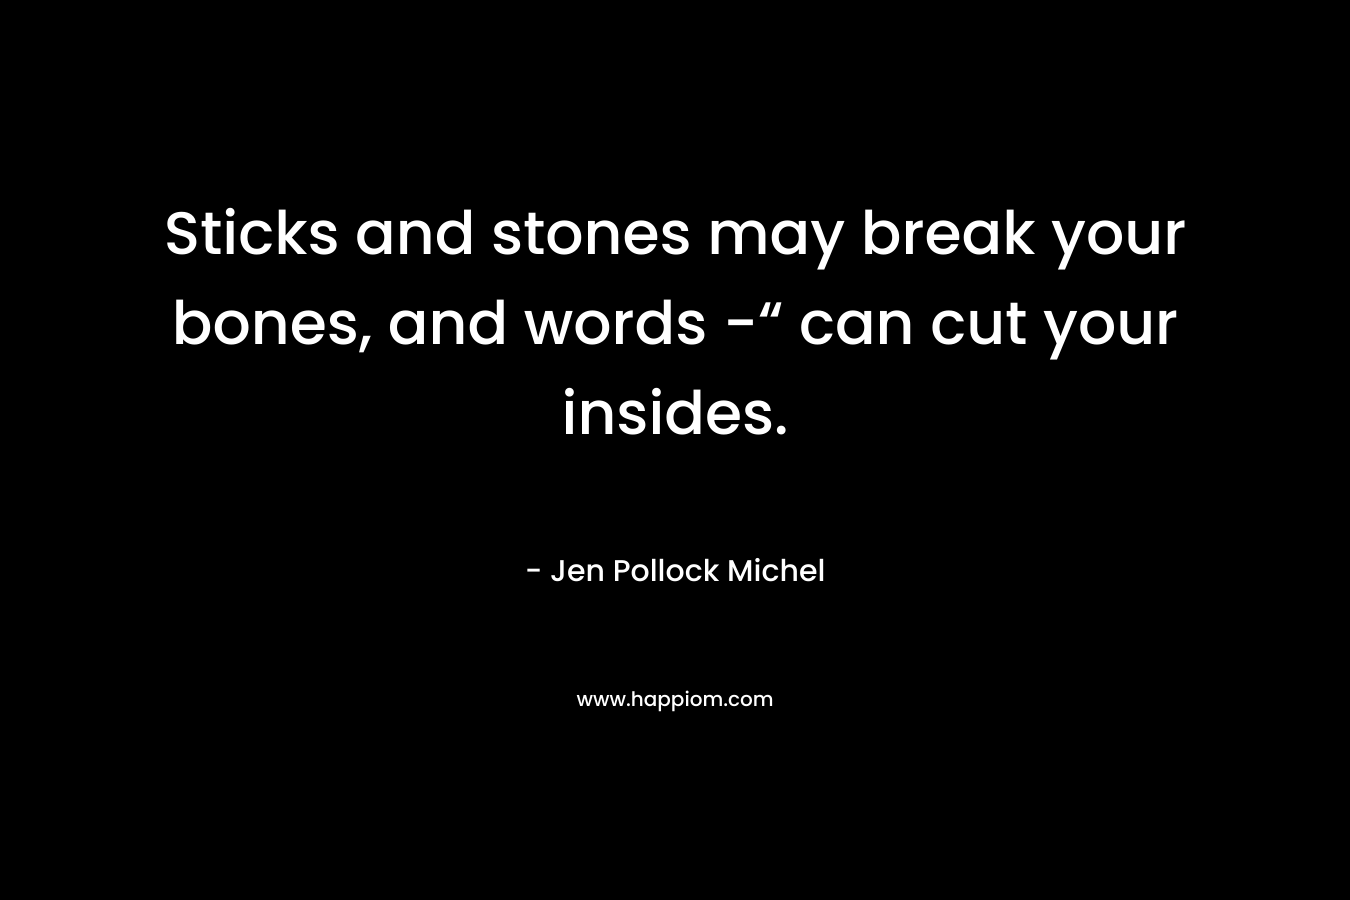 Sticks and stones may break your bones, and words -“ can cut your insides. – Jen Pollock Michel